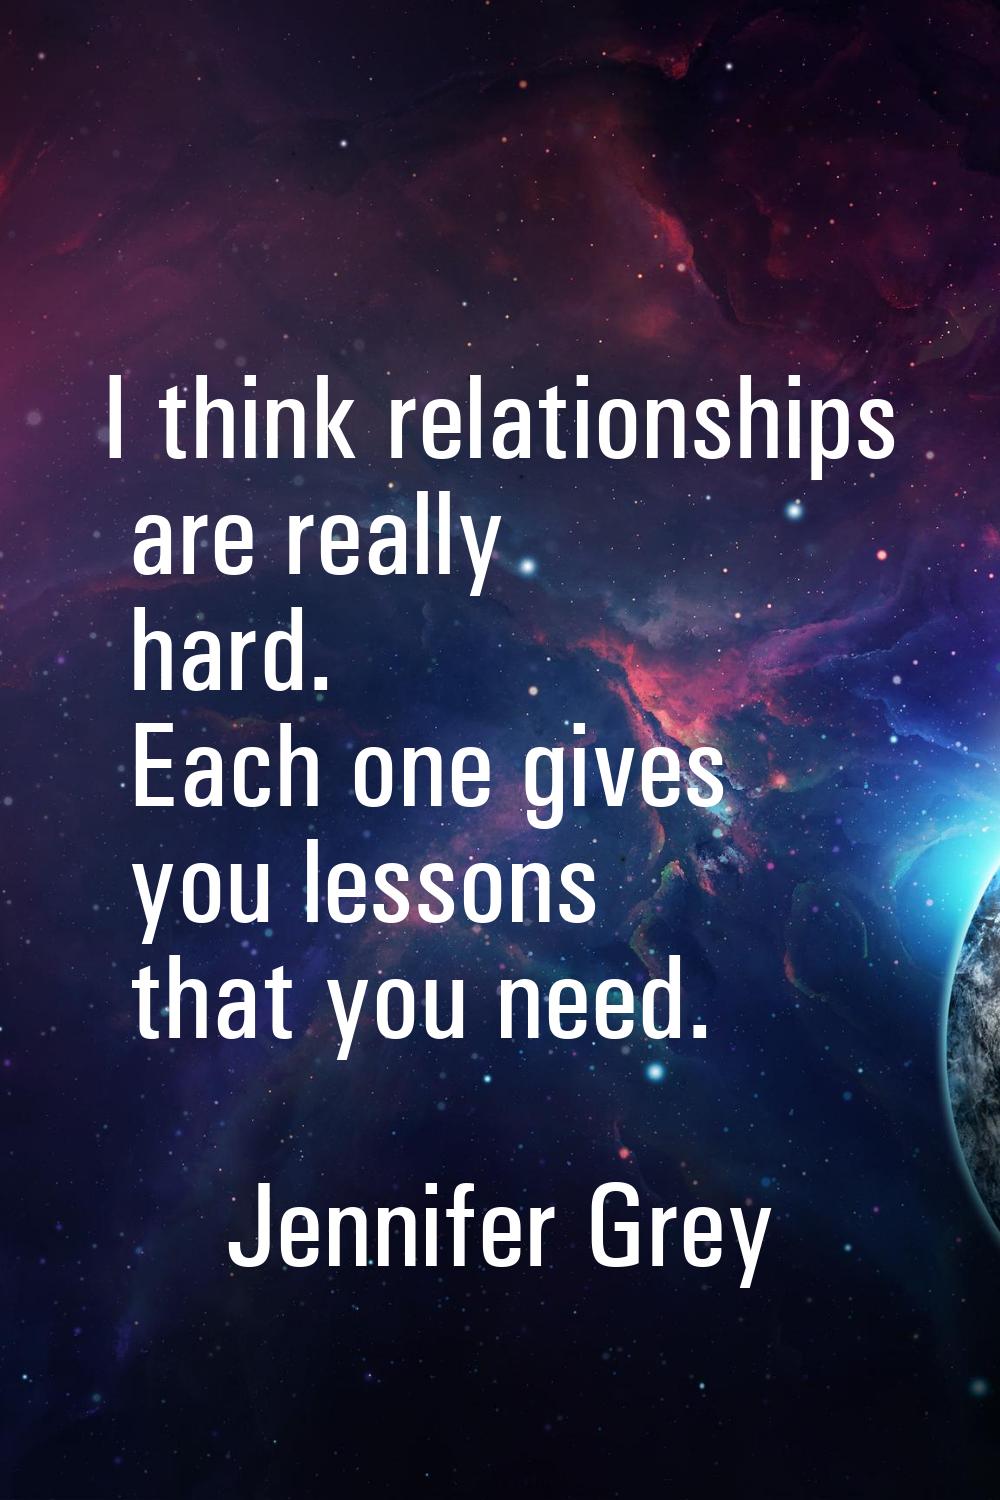 I think relationships are really hard. Each one gives you lessons that you need.